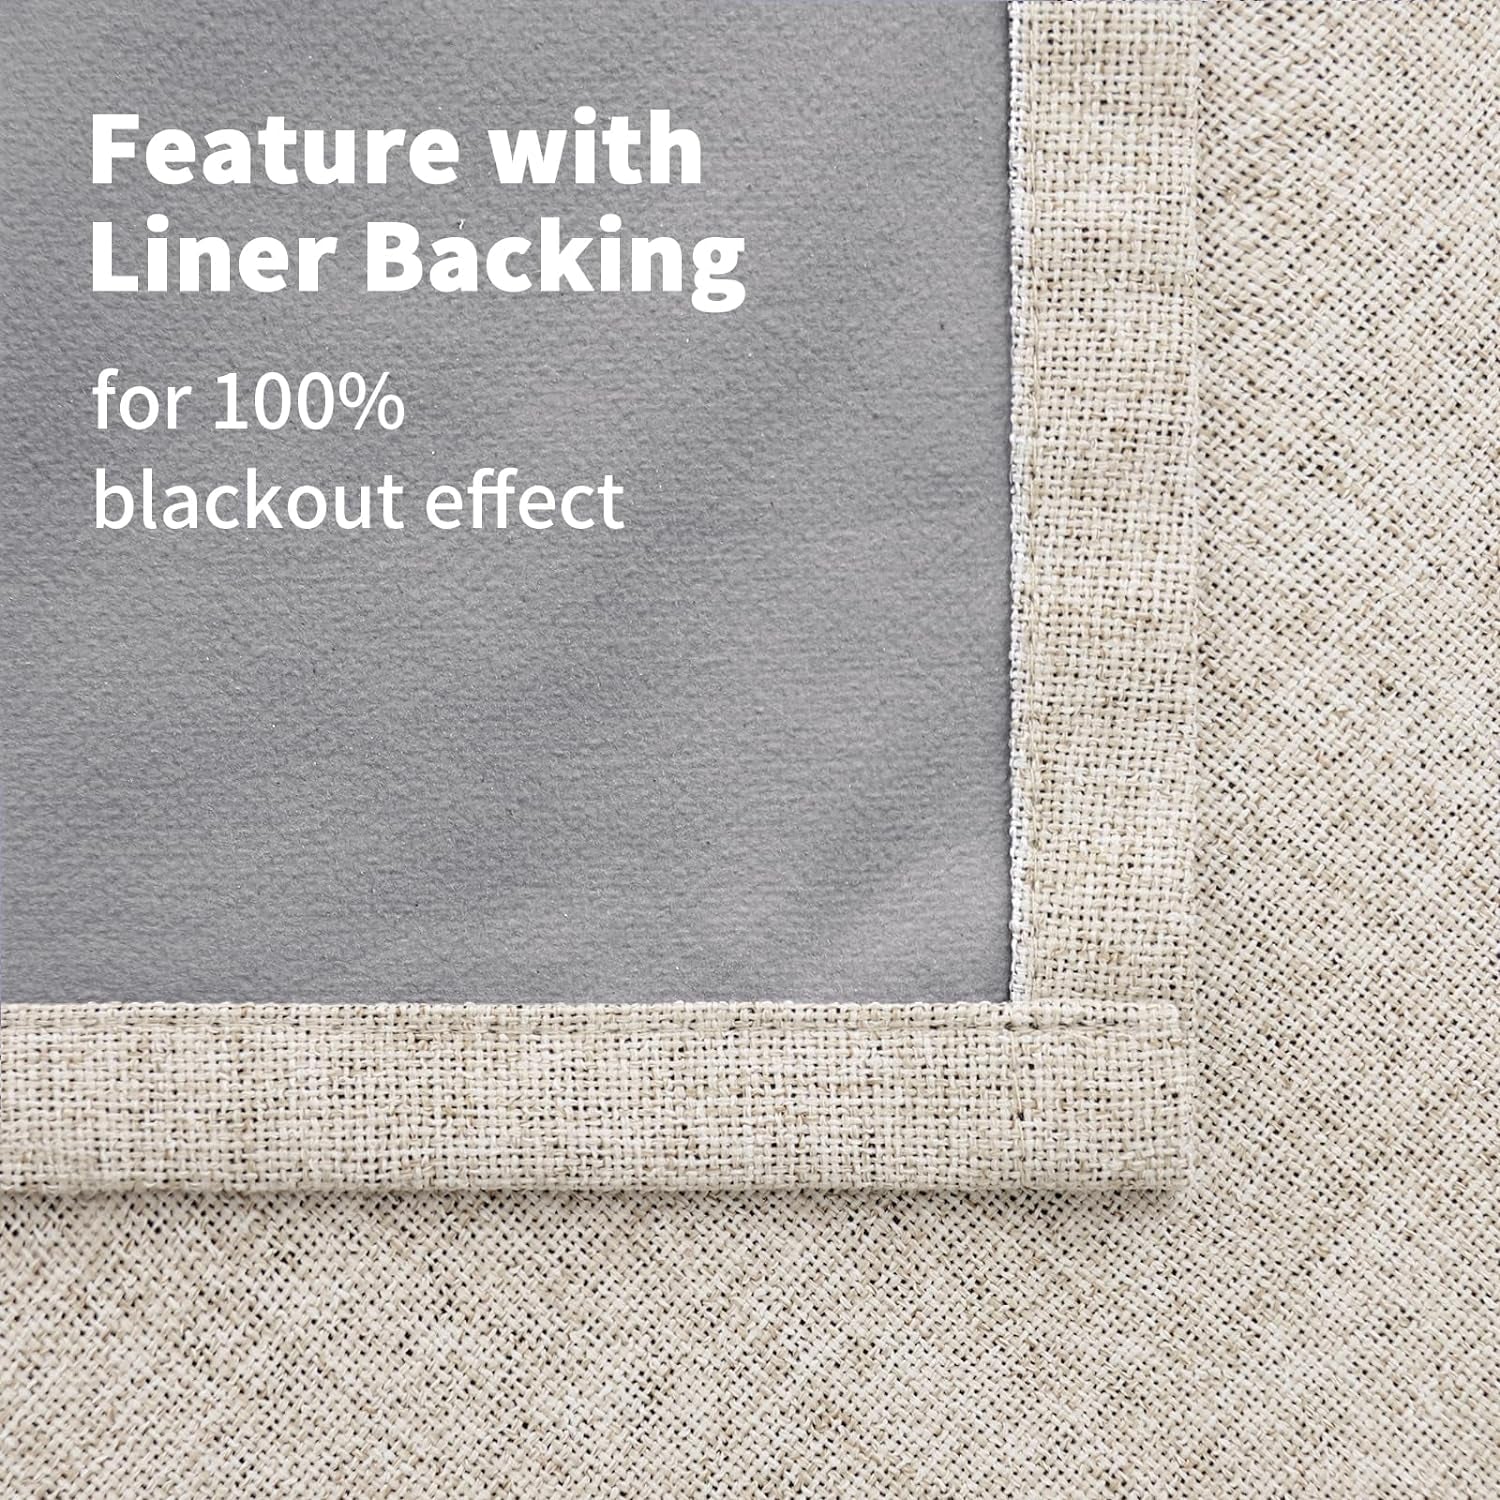 Youngstex Linen Blackout Curtains 63 Inch Length, Grommet Darkening Bedroom Curtains Burlap Linen Window Drapes Thermal Insulated for Basement Summer Heat, 2 Panels, 52 X 63 Inch, Beige  YoungsTex   